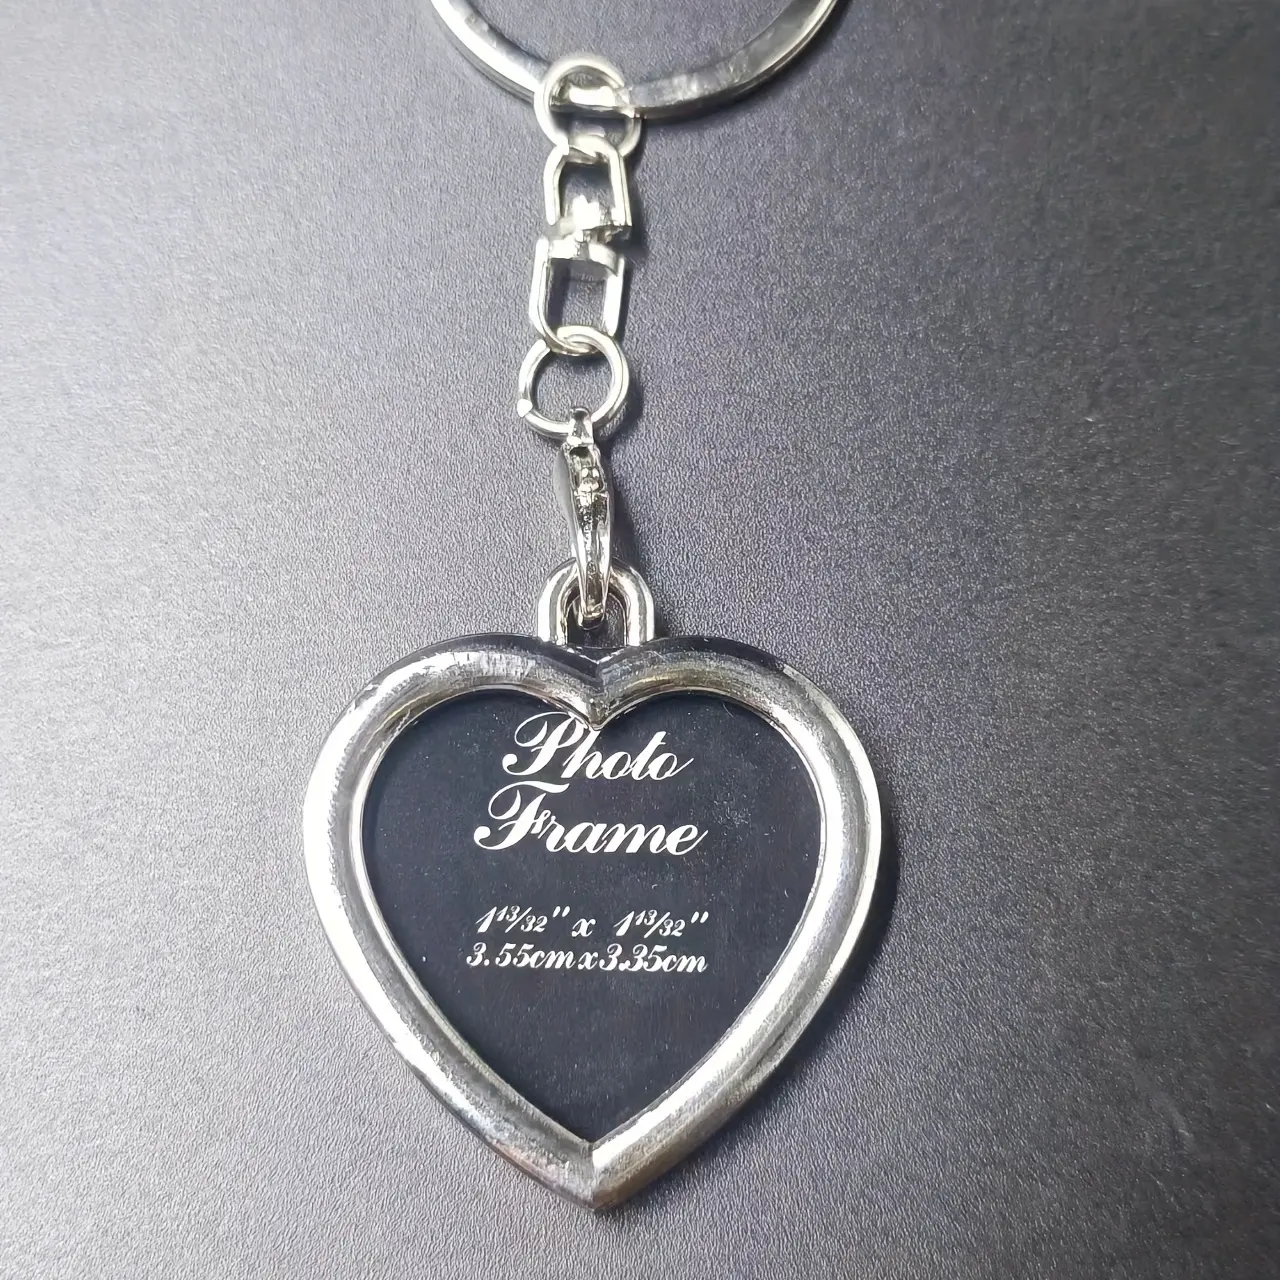 Zinc Alloy Photo Frame Keychain for Gift to your girl or boyfriend Key Chain to Show your Photo